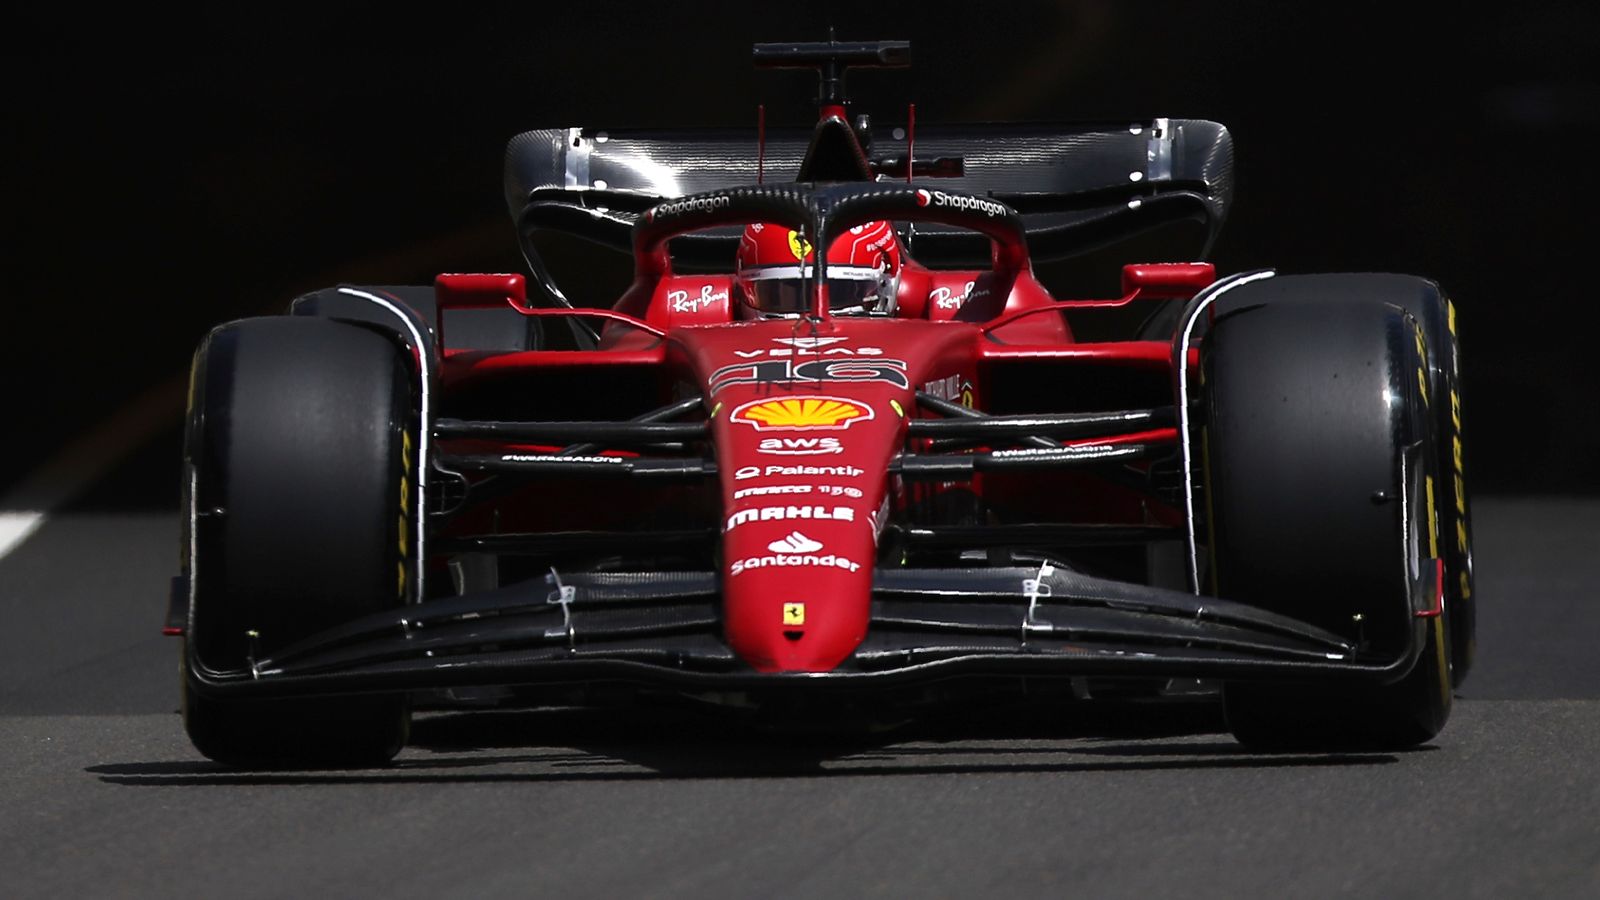 Monaco GP: Charles Leclerc fastest from Sergio Perez in Practice One, as Mercedes struggle